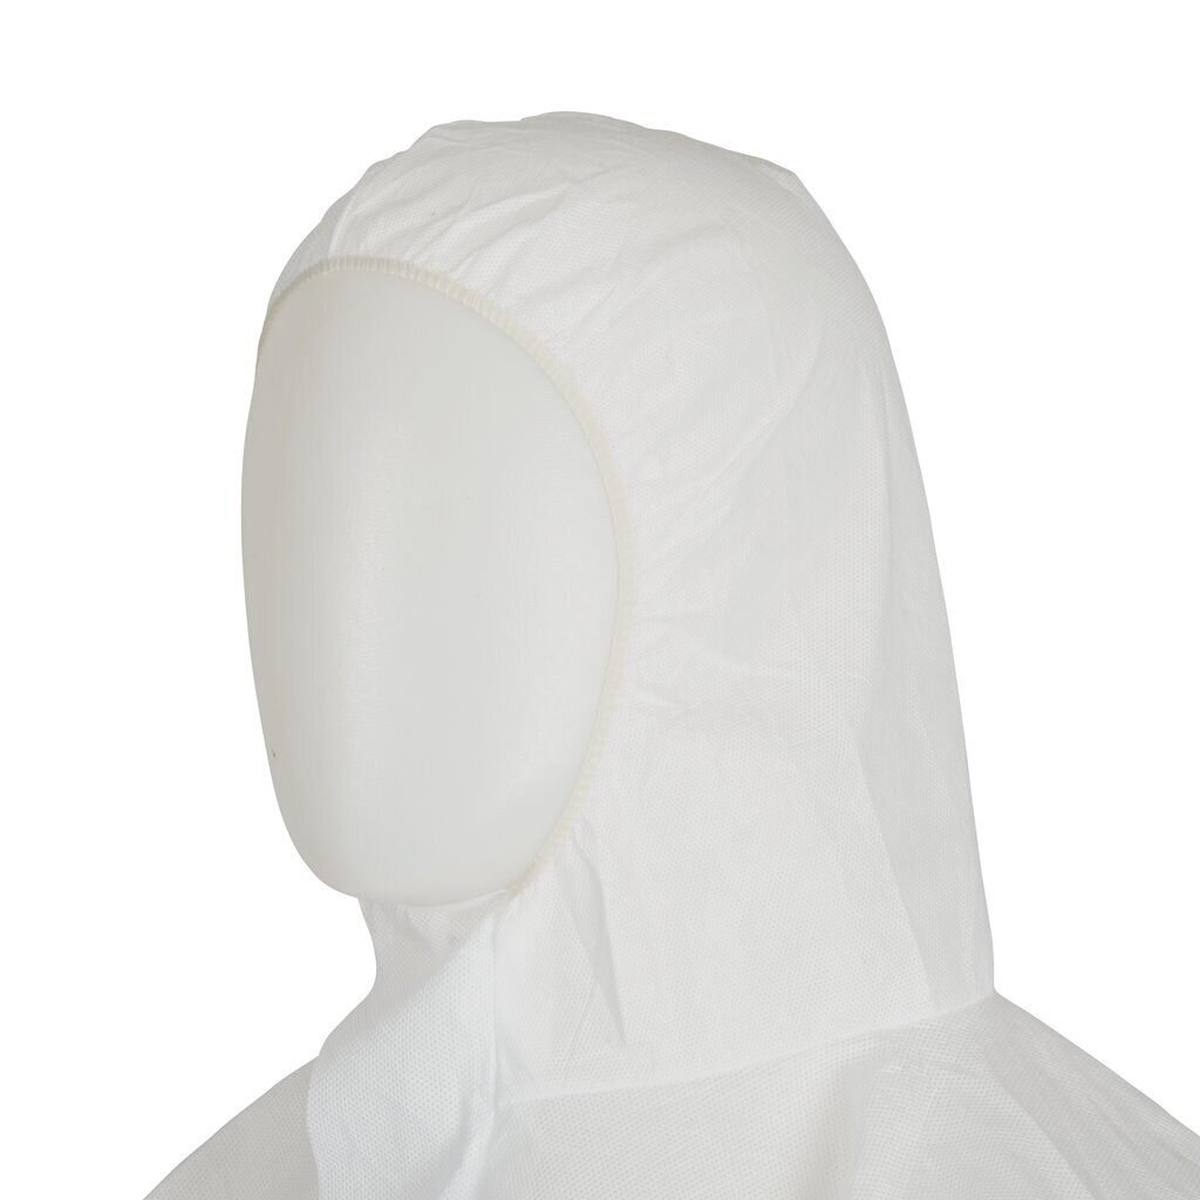 3M 4515W Protective coverall, white, TYPE 5/6, size L, material SMMS low-lint, elastic band finish